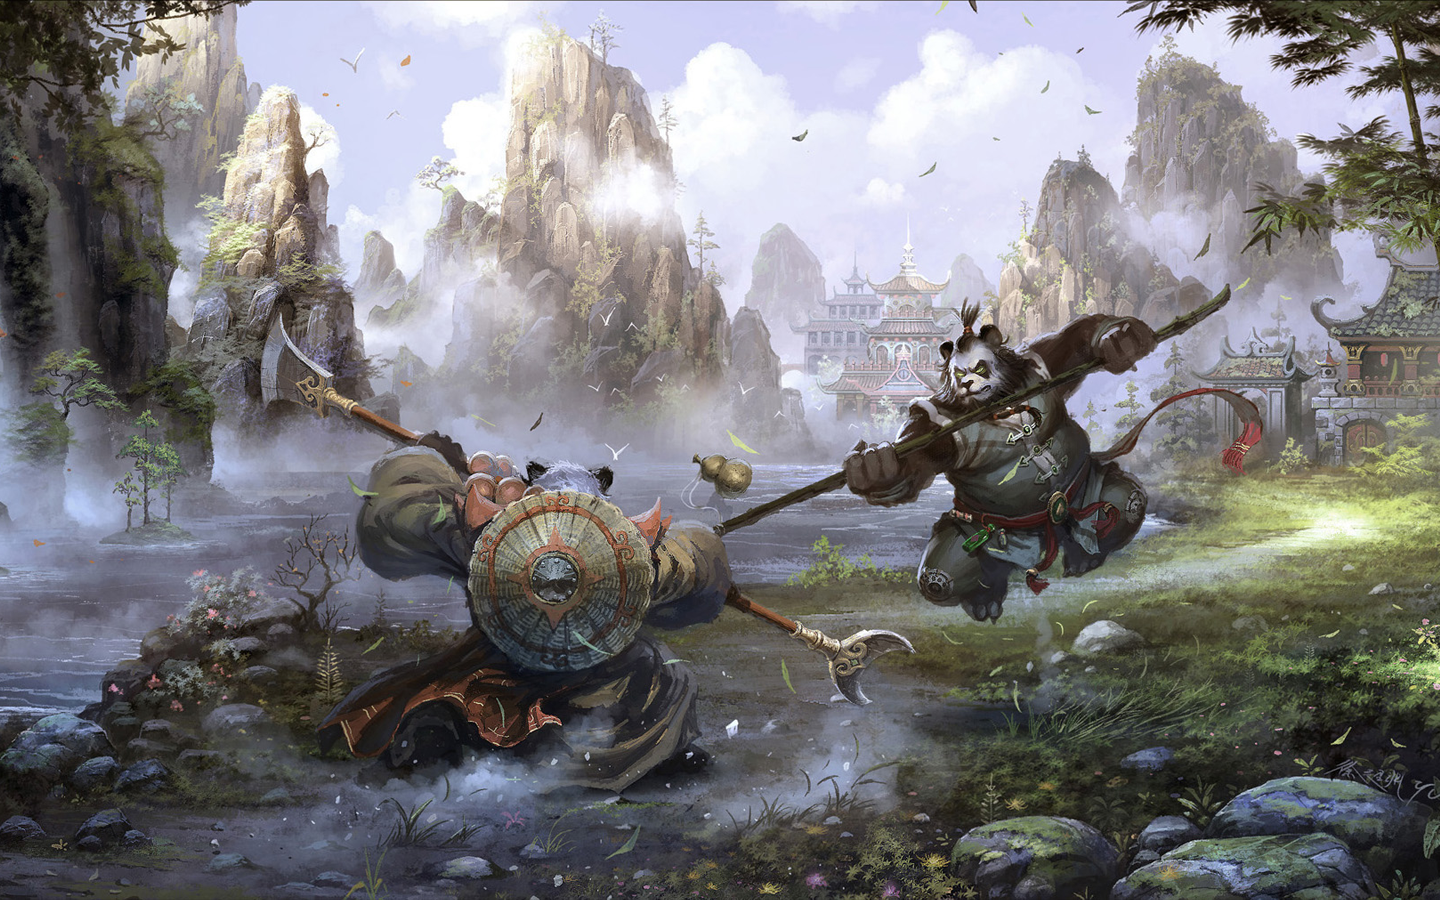 General 1440x900 World of Warcraft: Mists of Pandaria World of Warcraft video games warrior fantasy art PC gaming Blizzard Entertainment video game art